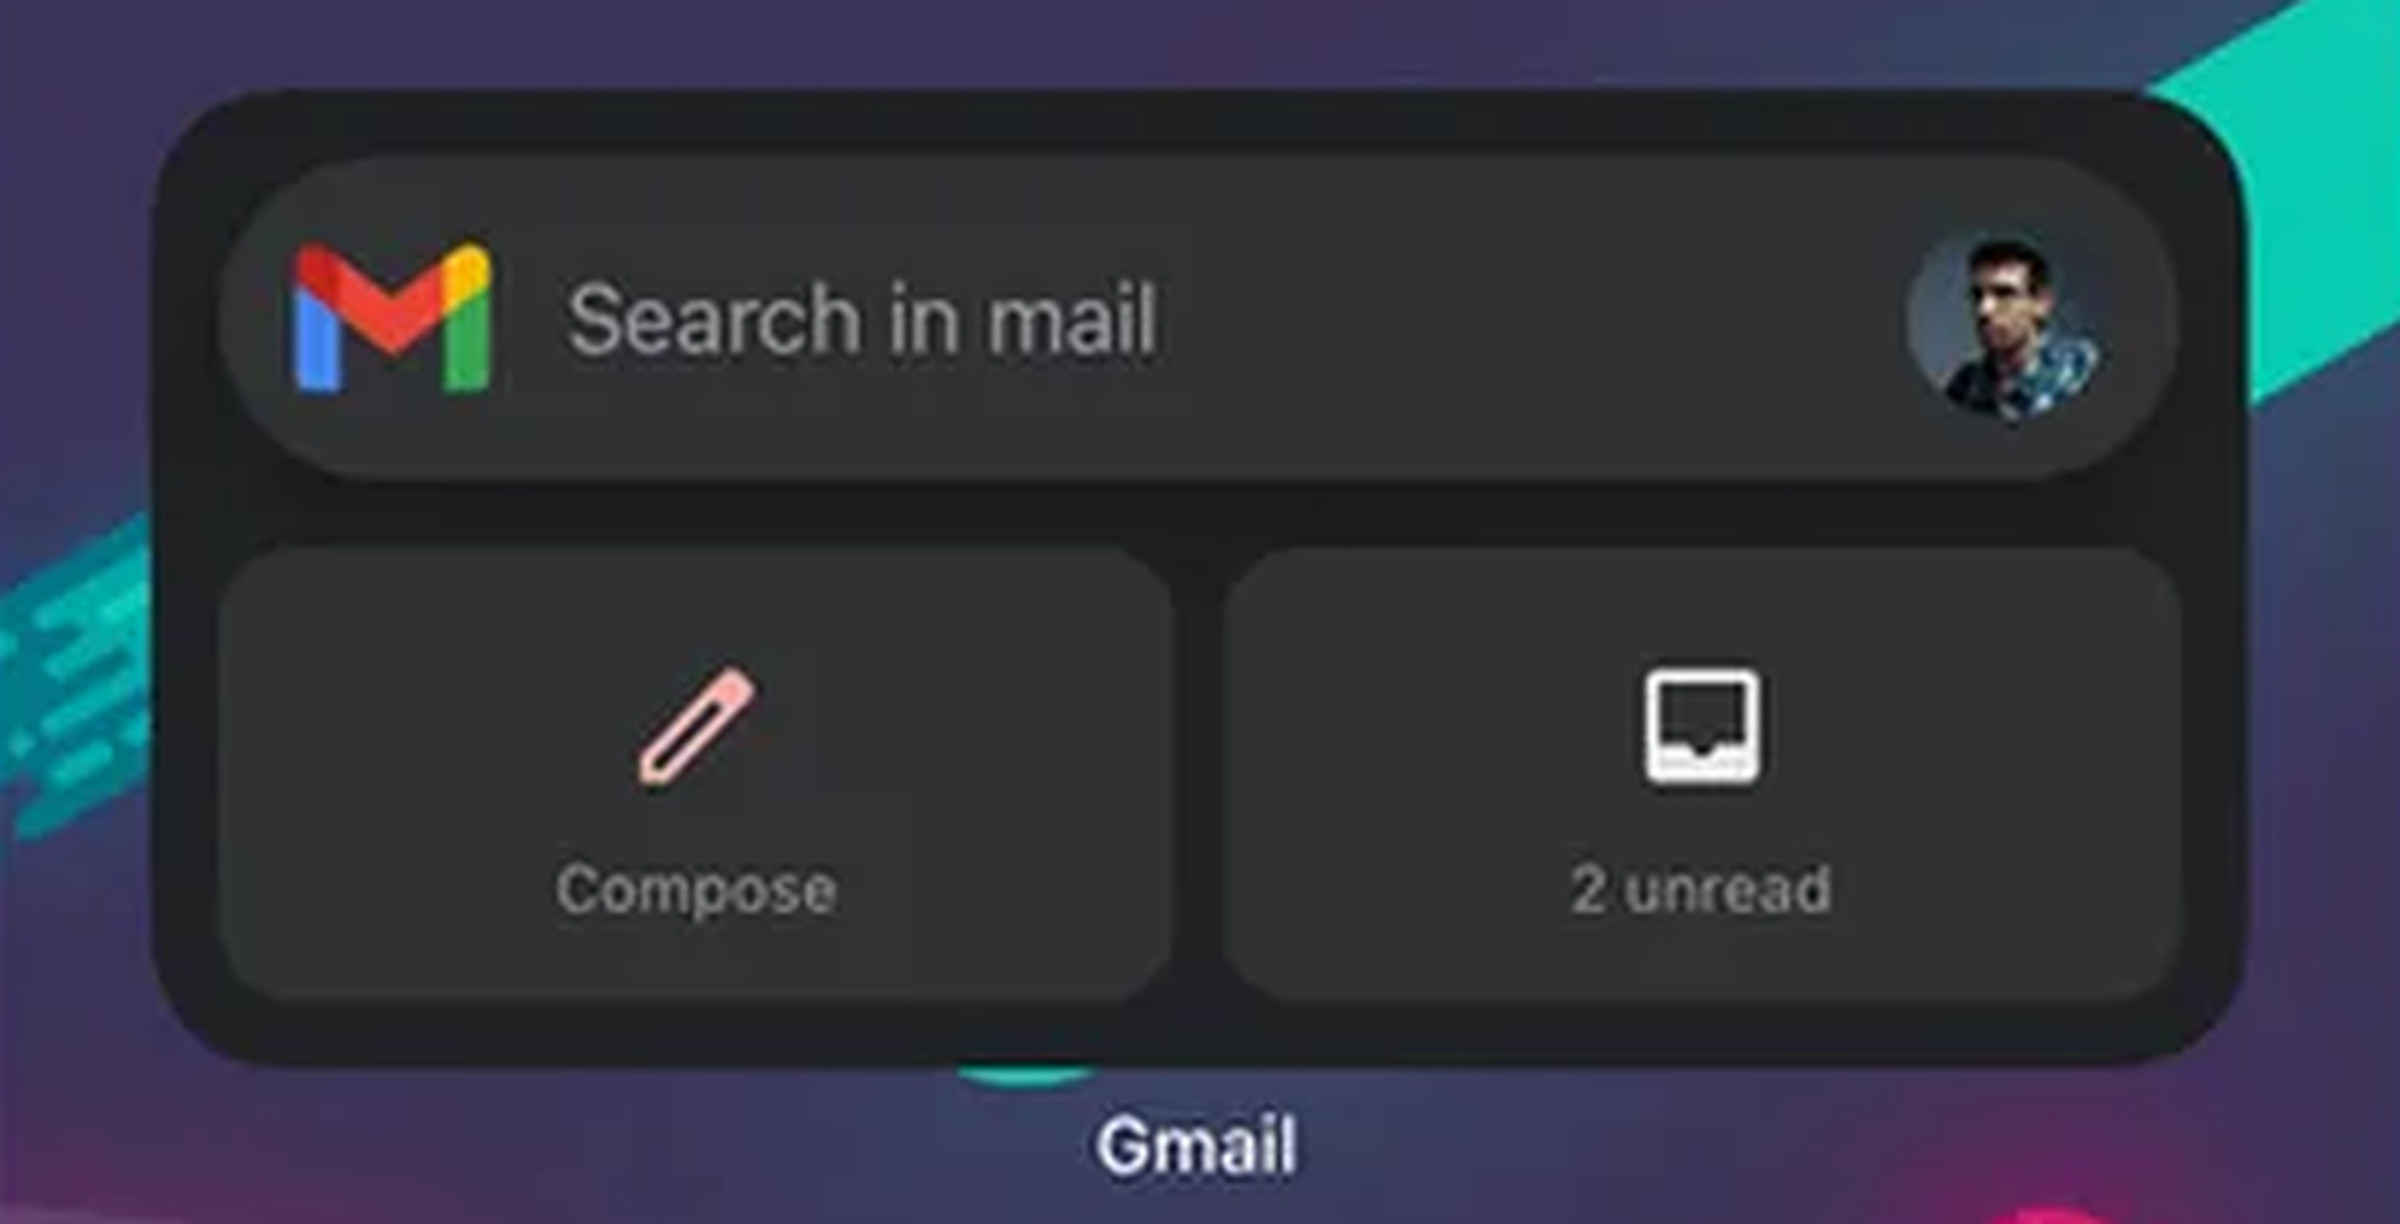 The old widget can only take to to the app’s search, compose, and inbox screen.